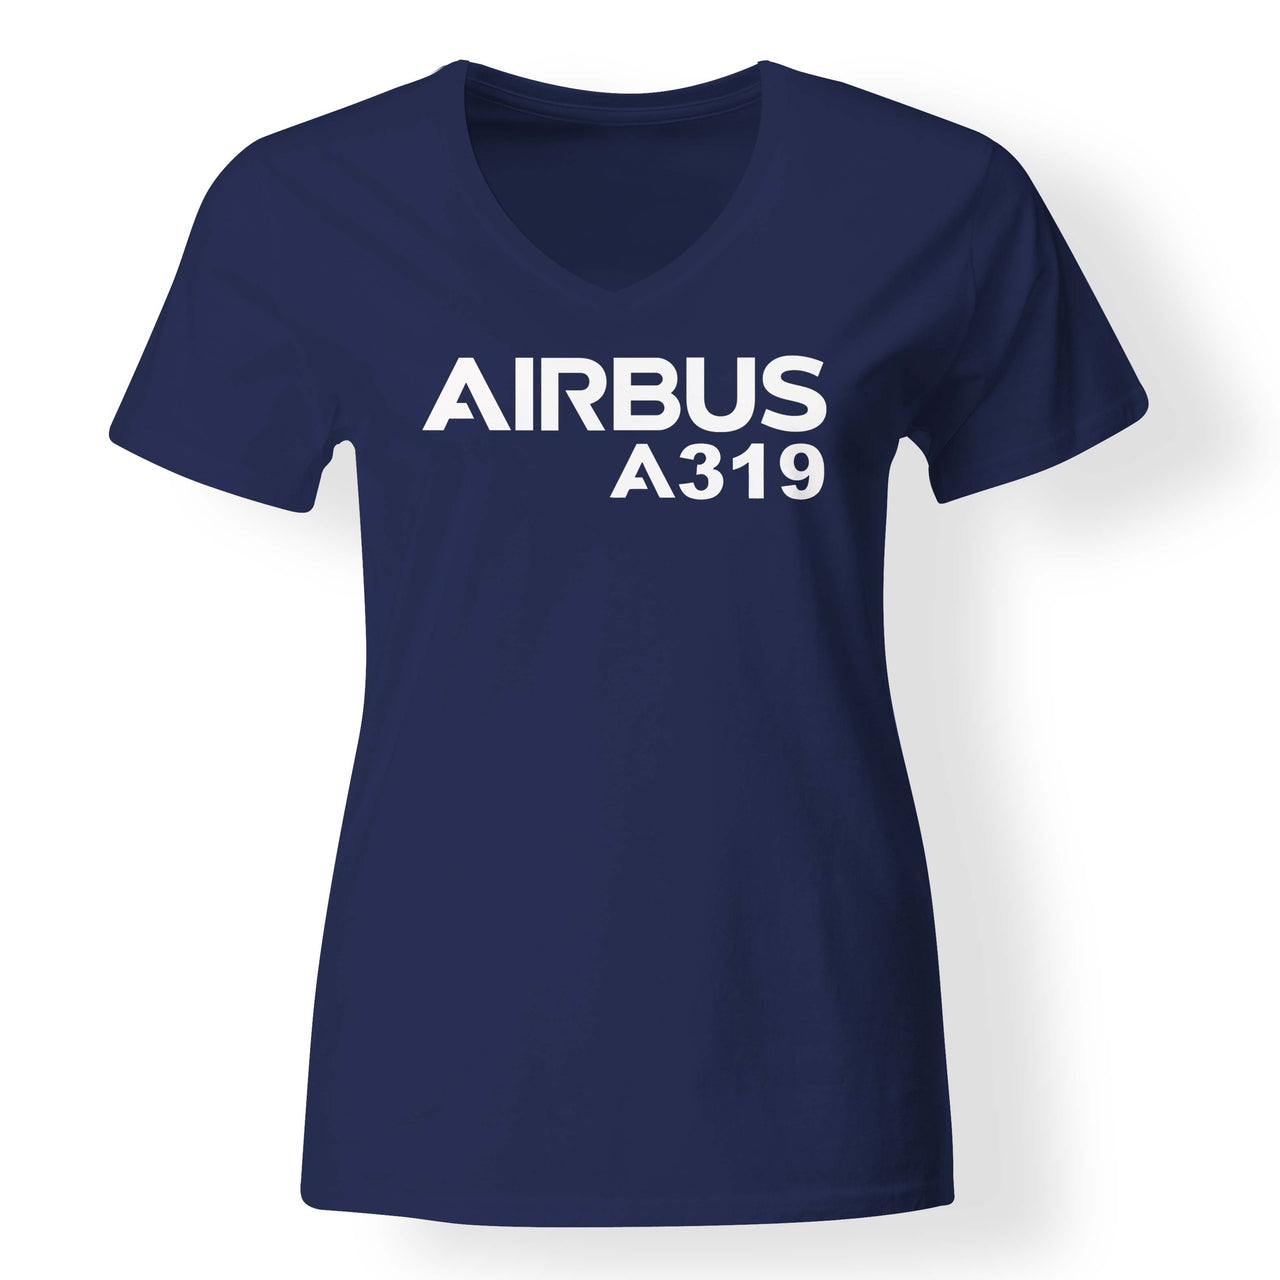 Airbus A319 & Text Designed V-Neck T-Shirts